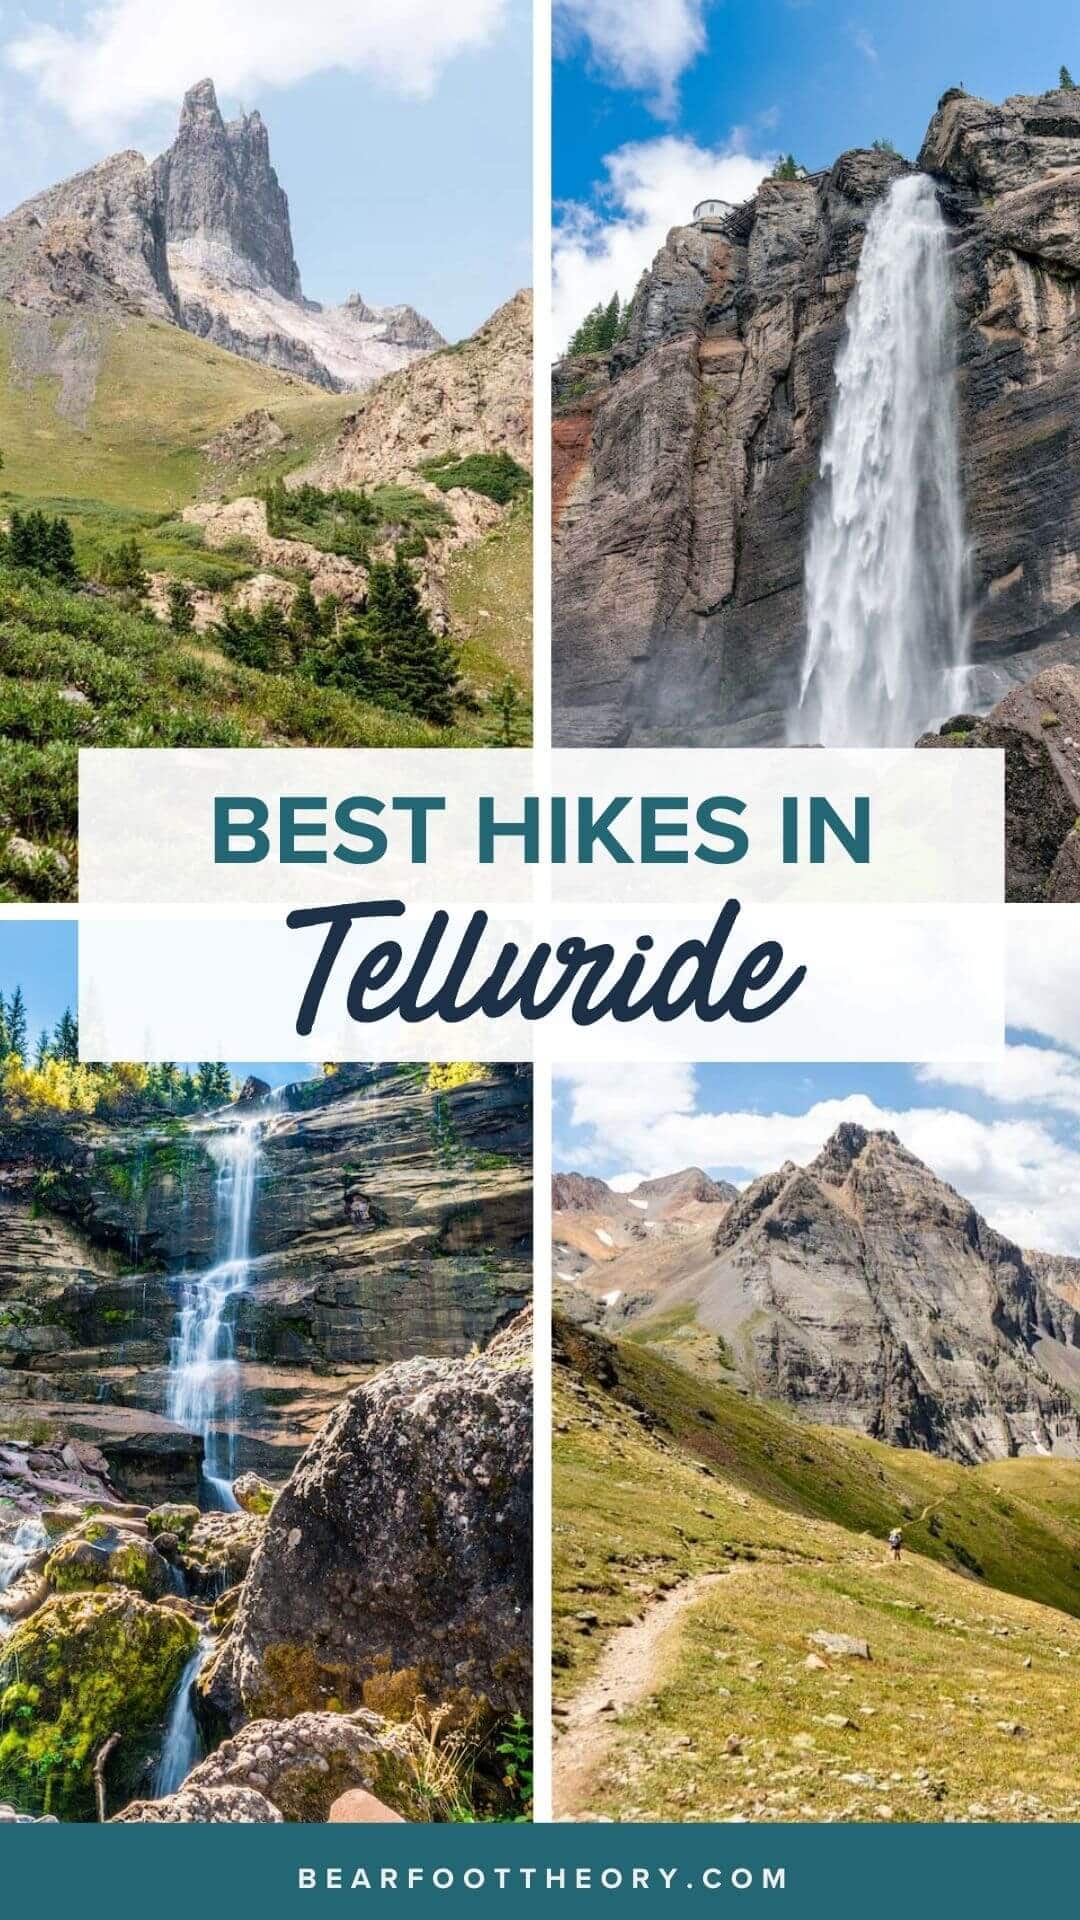 Learn about 7 of the best Telluride hikes for day hikers, including distance, elevation gain, and directions to the trailheads.